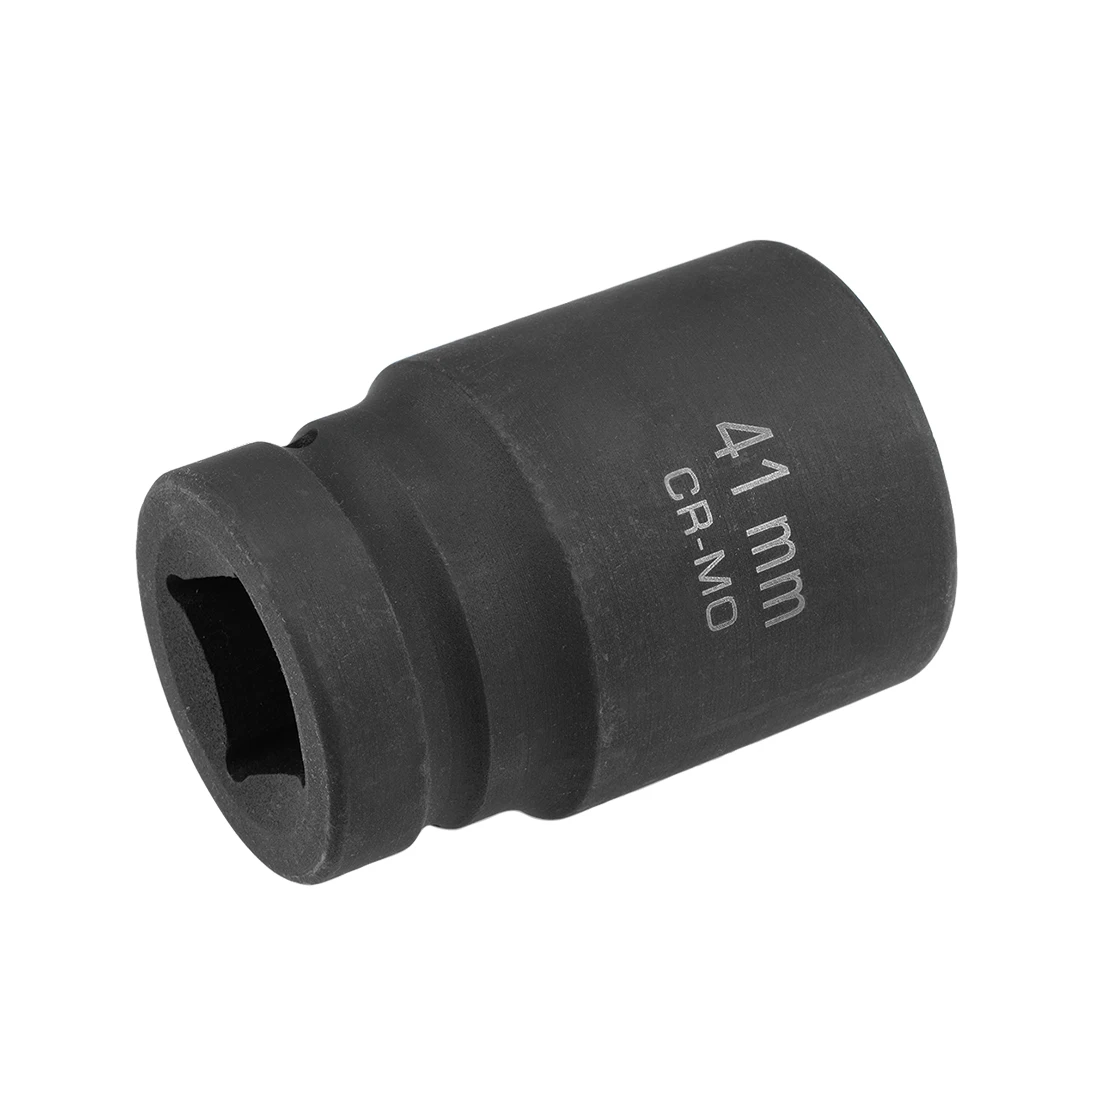 

uxcell 1-Inch Drive Impact Socket 6-Point Cr-Mo Metric 41mm to DIY Hand-making Automotive Repairs Household Maintenance etc.